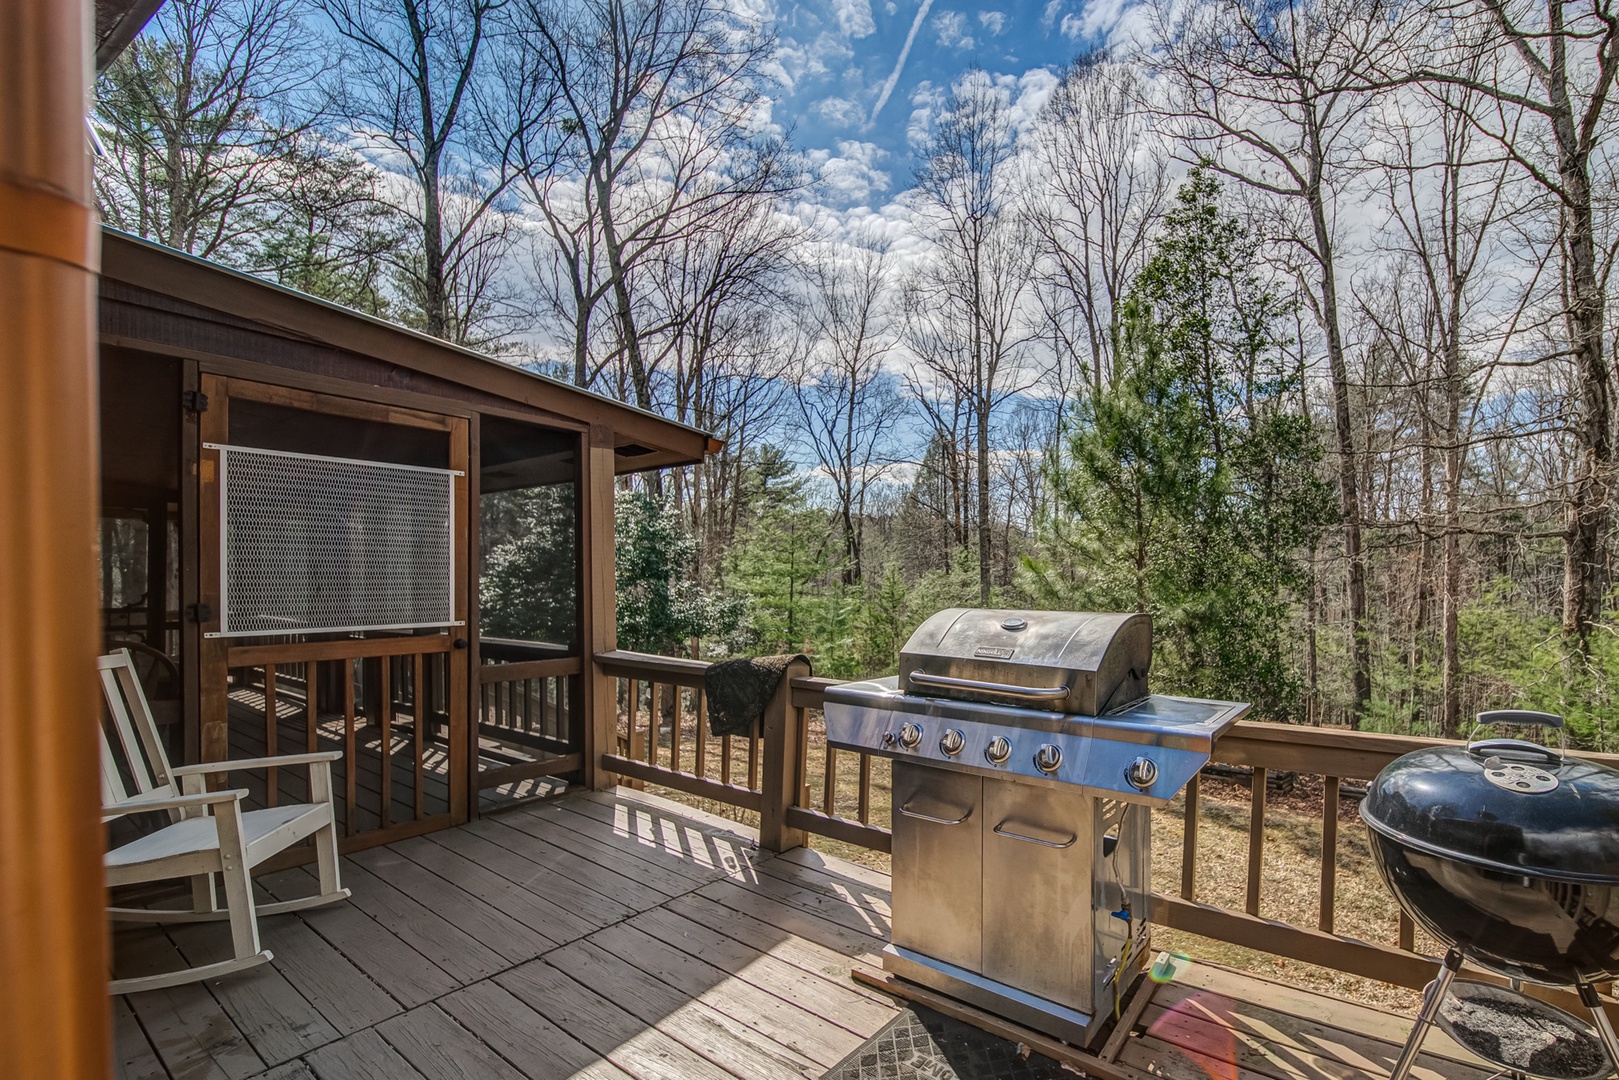 Enjoy grilling with a view whether you’re a fan of charcoal or gas